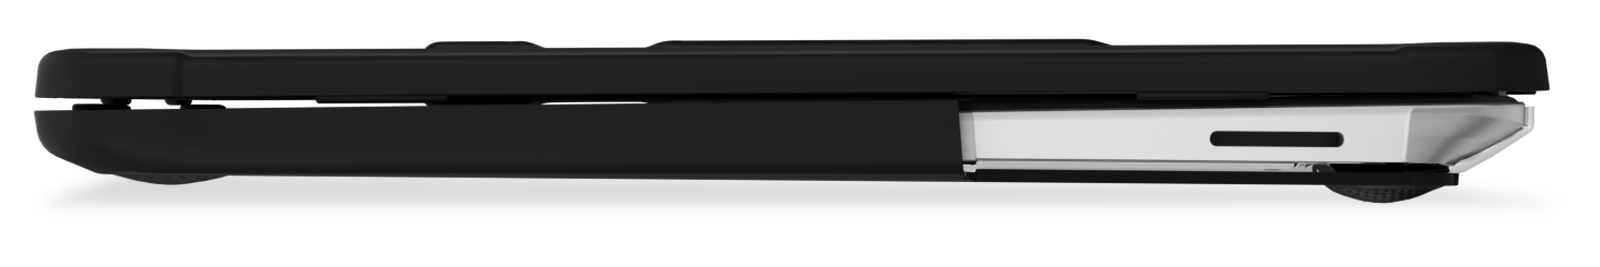 Dux for Surface laptop, viewed from side